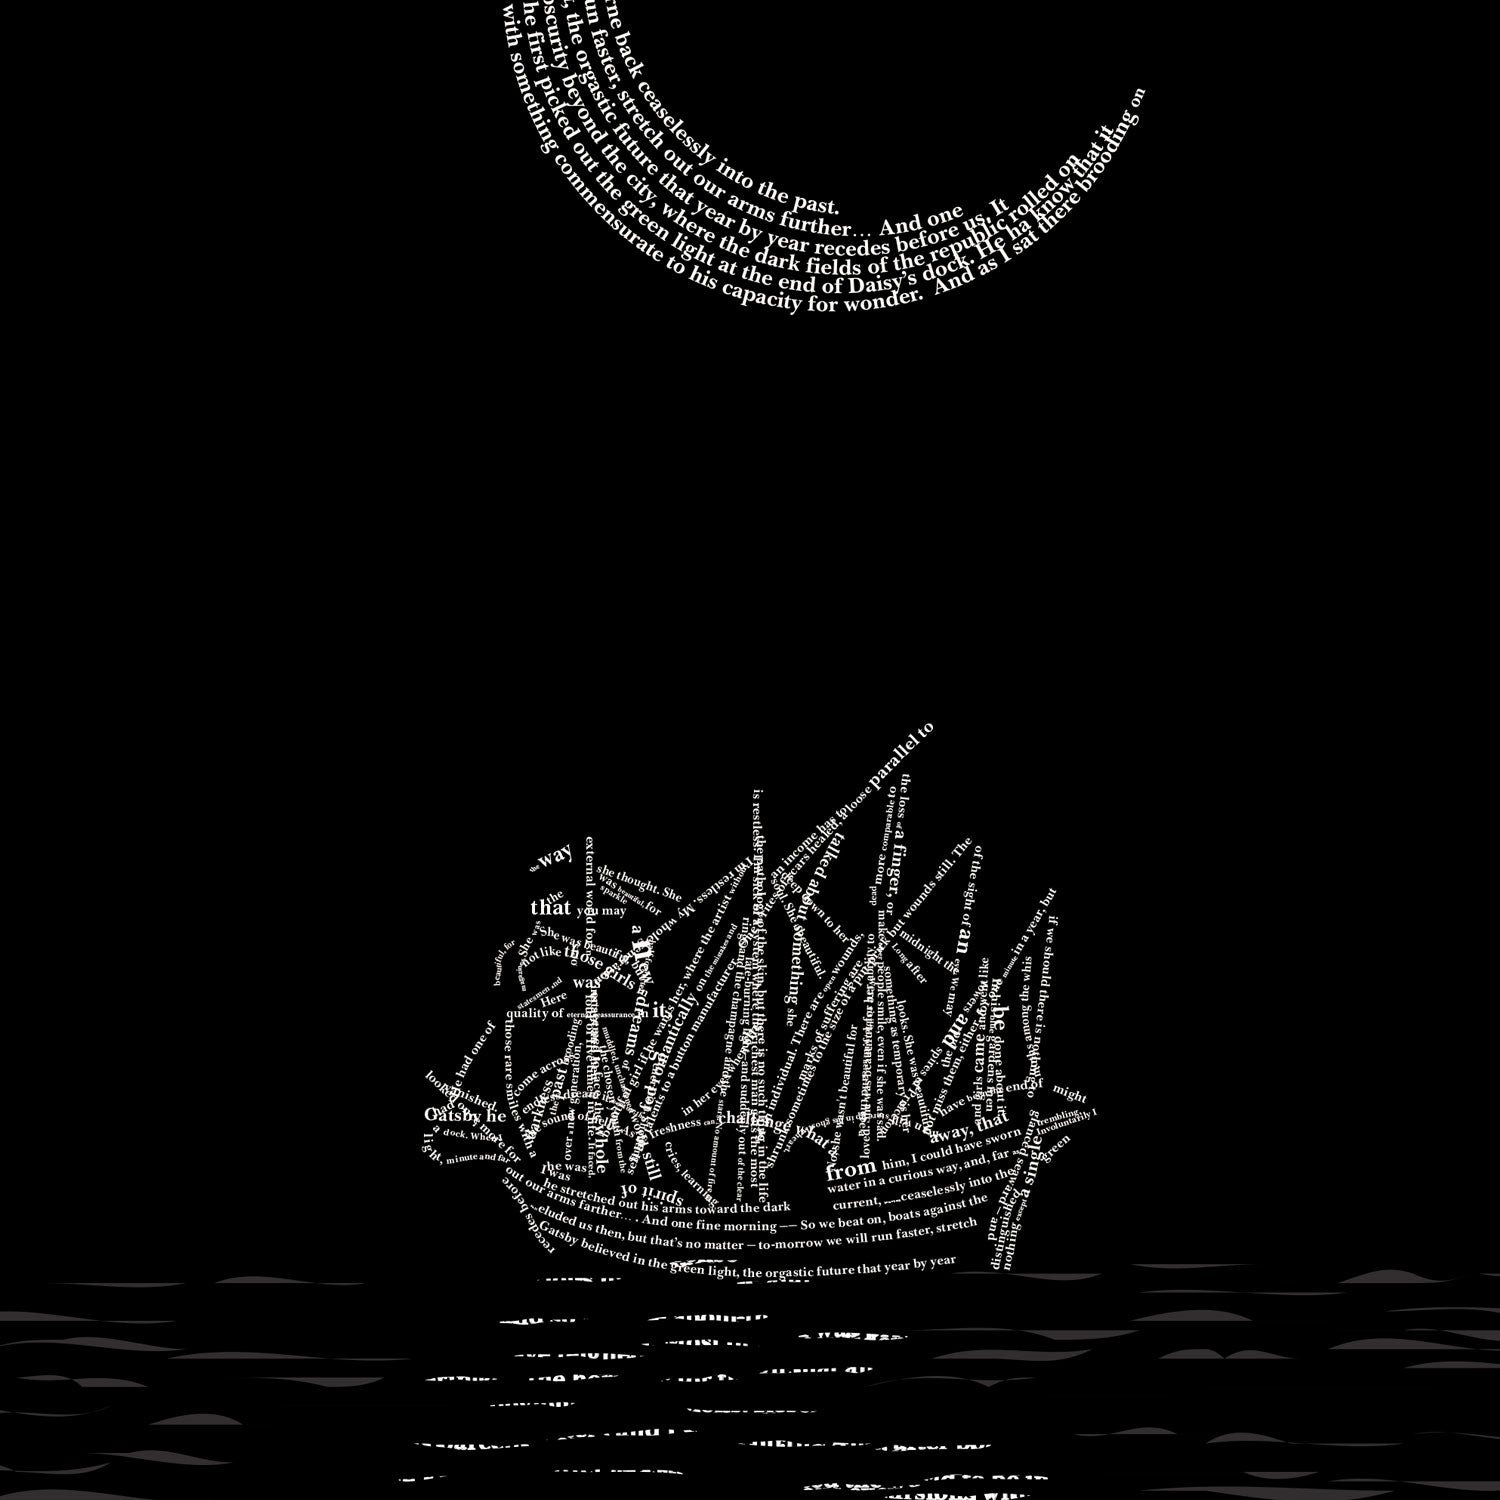 F Scott Fitzgerald The Offshore Pirate Illustration by Evan Robertson